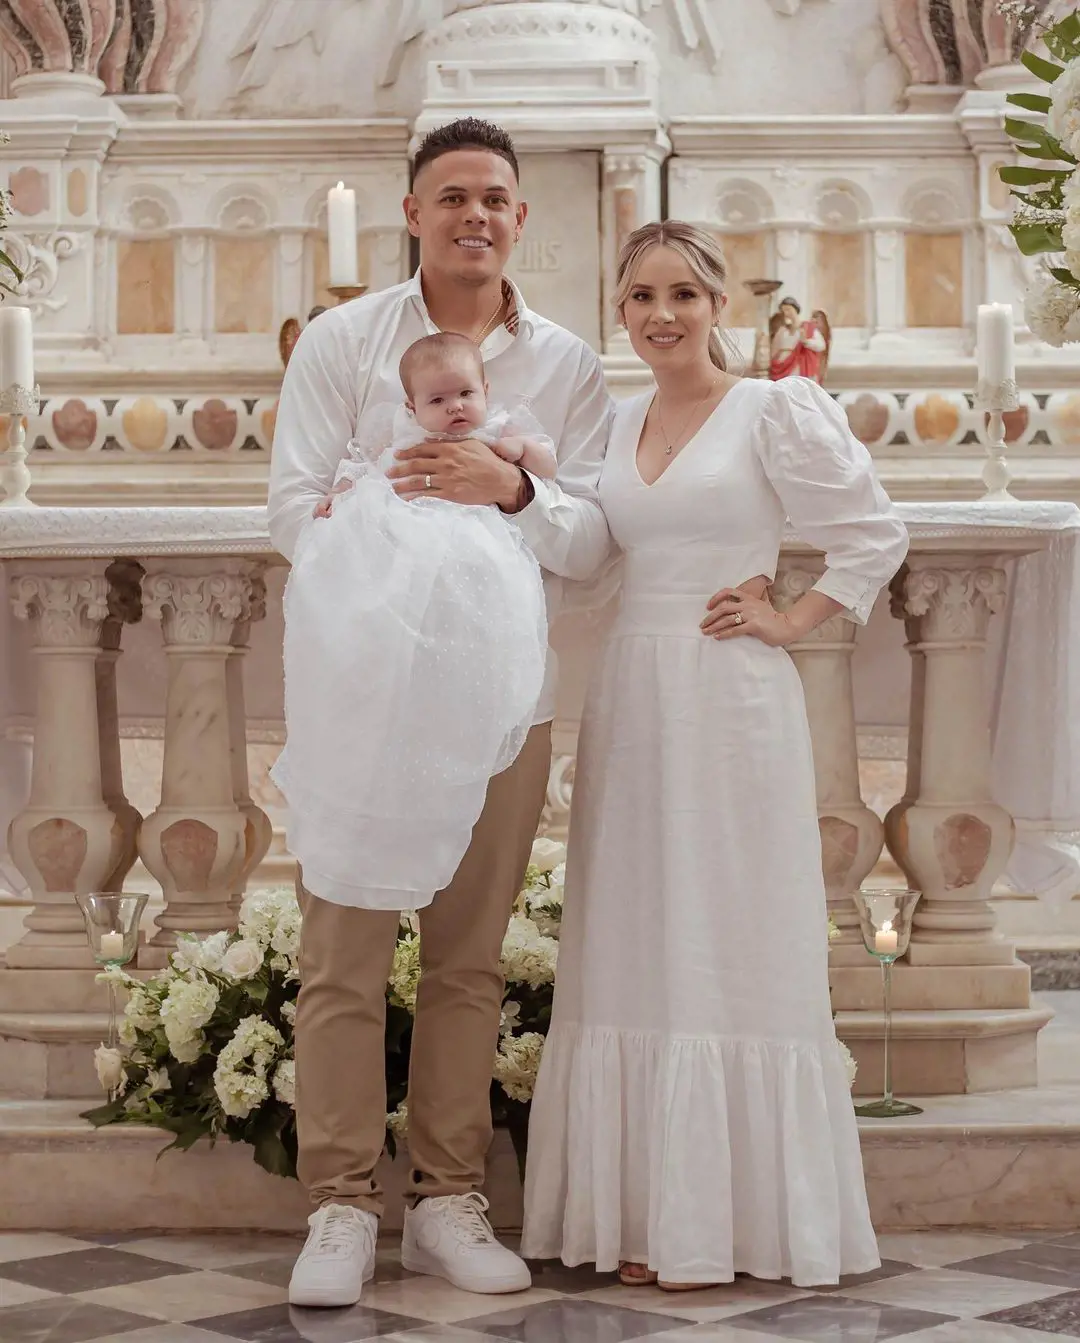 Gio and Danna holding their daughter during her baptism